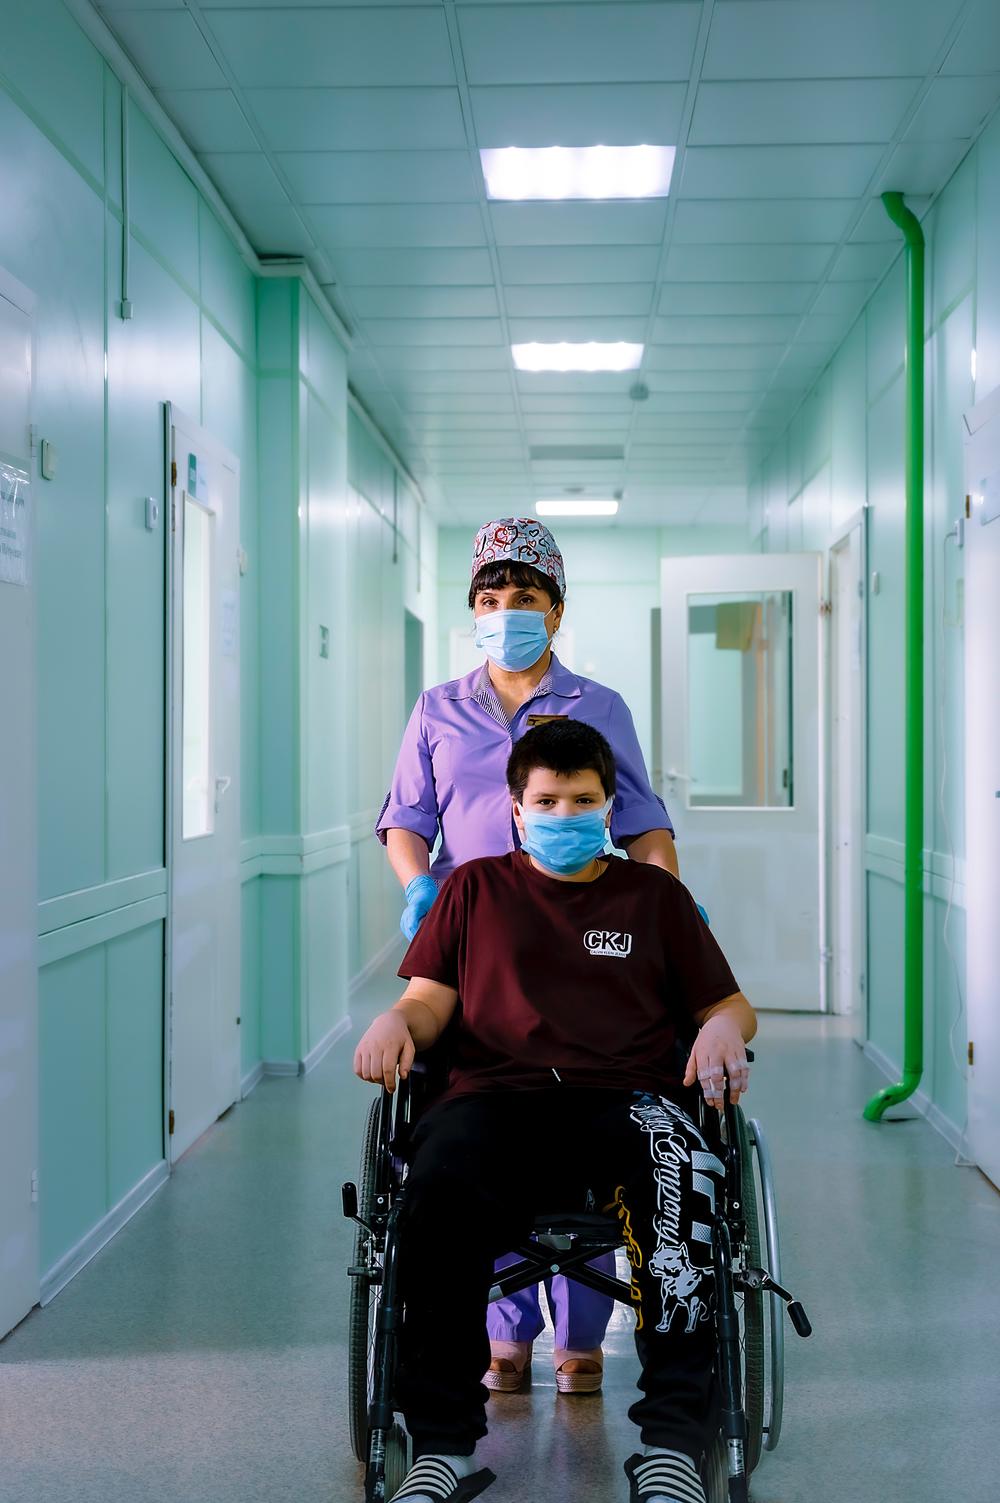 Nurse in purple scrubs and mask walking patient in mask and wheelchair down a facility hallway.